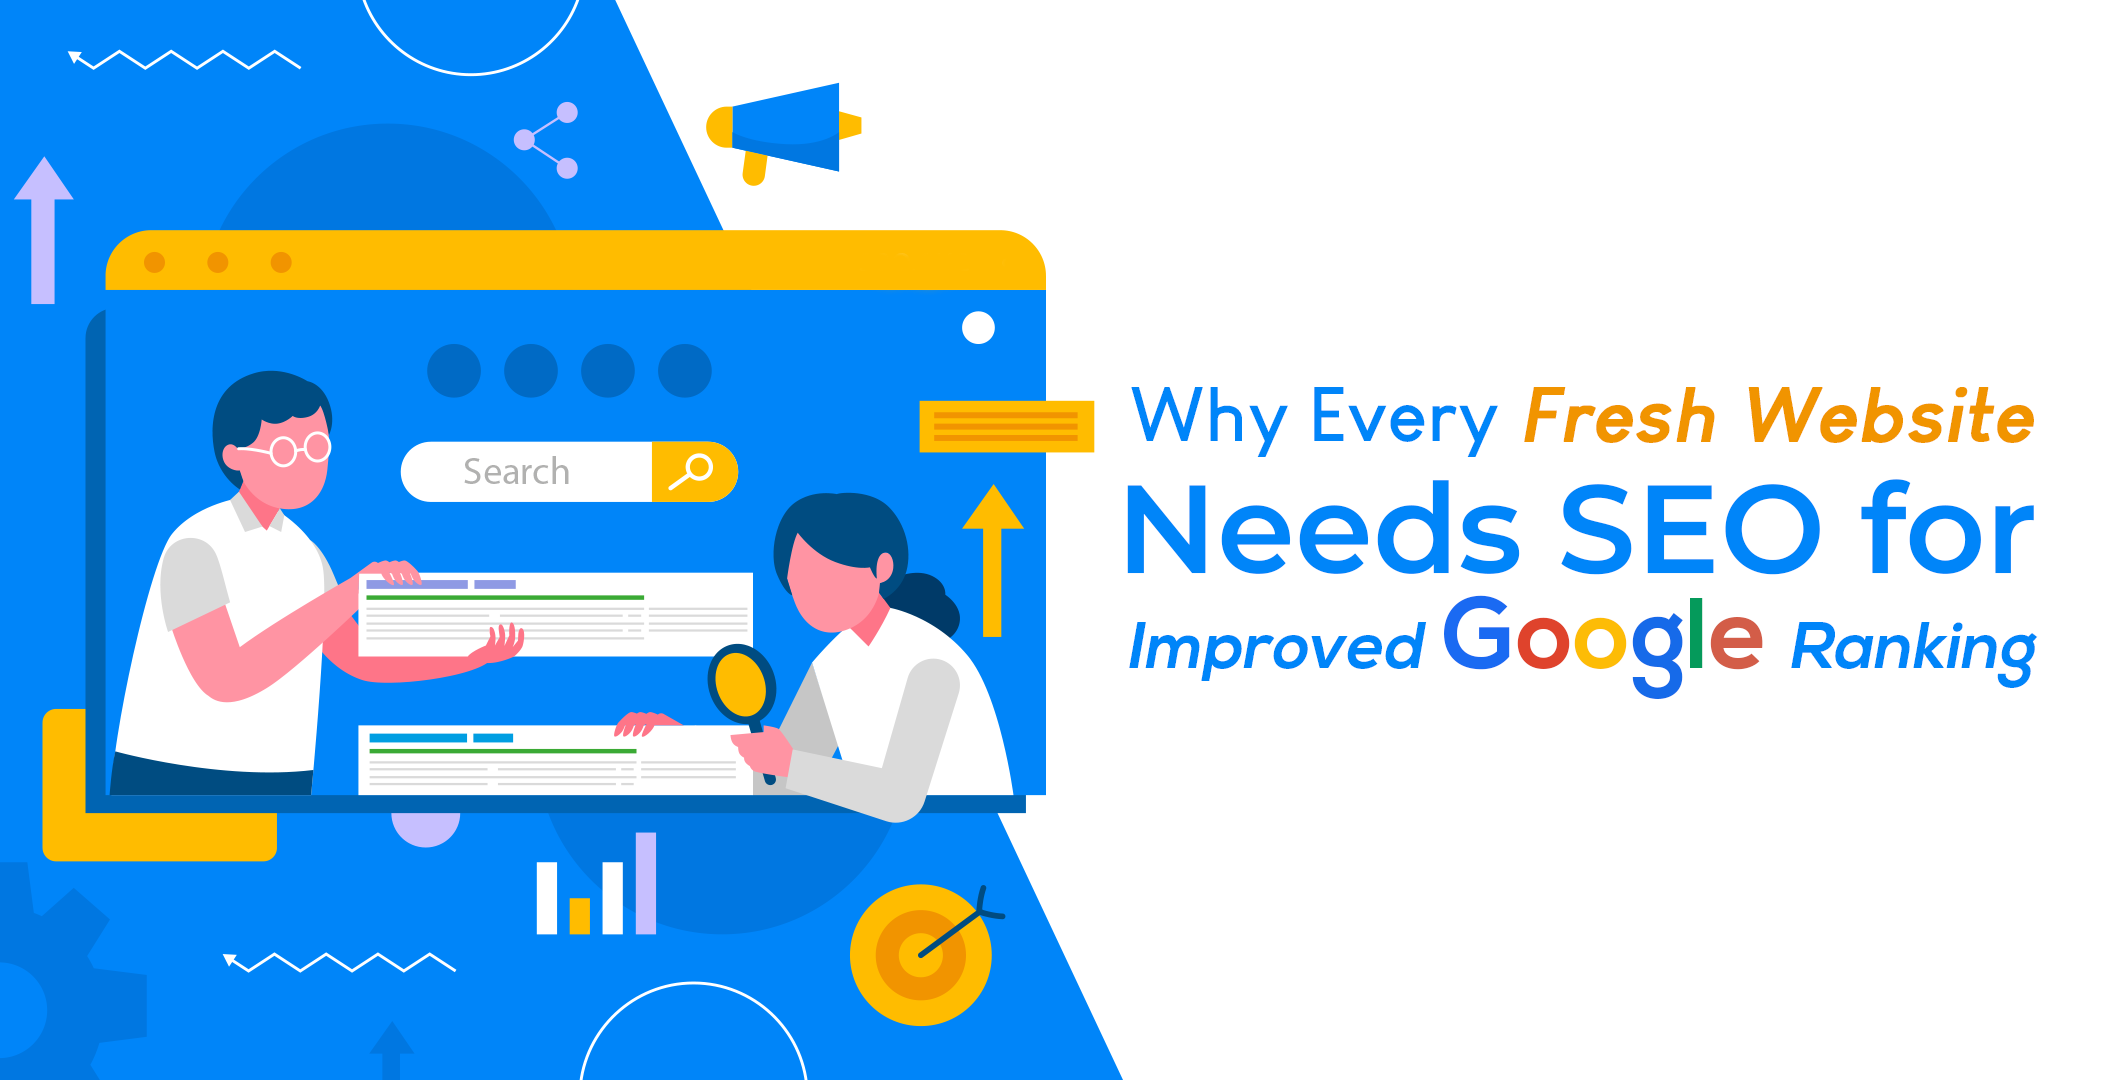 Why Every Fresh Website Needs SEO for Improved Google Ranking